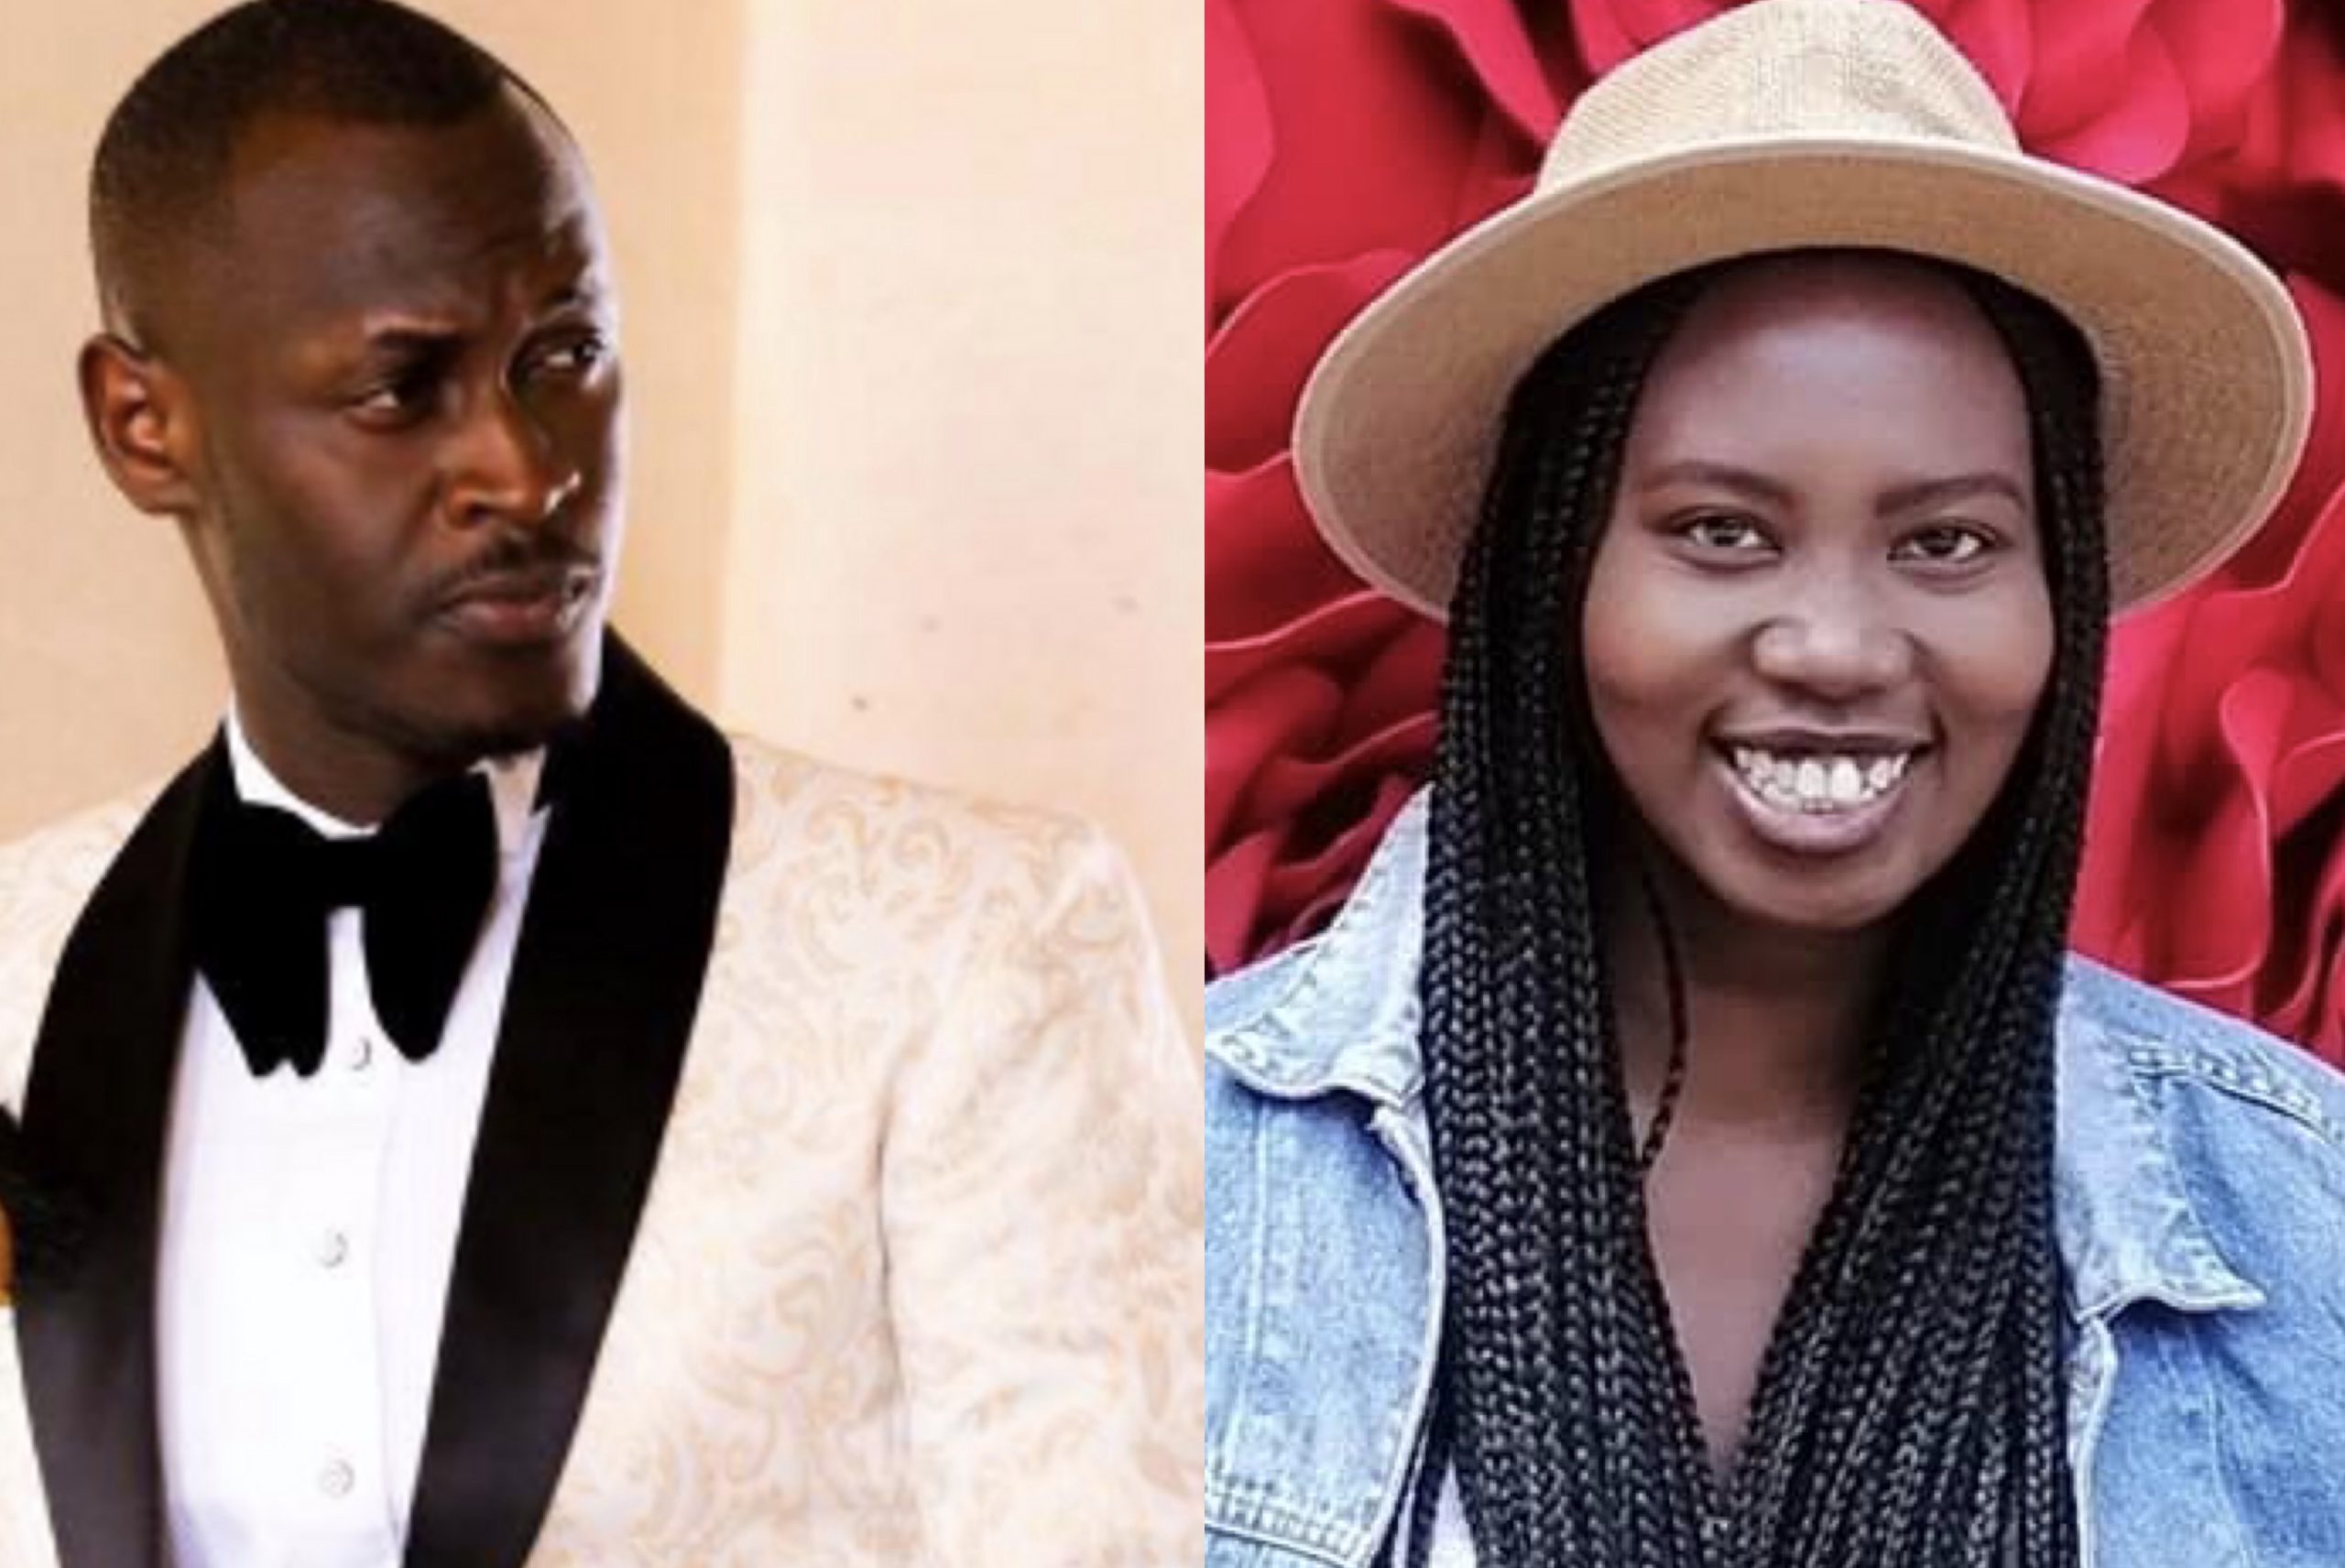 King Kaka’s baby mama shares unknown details about her struggle with depression and suicidal thoughts